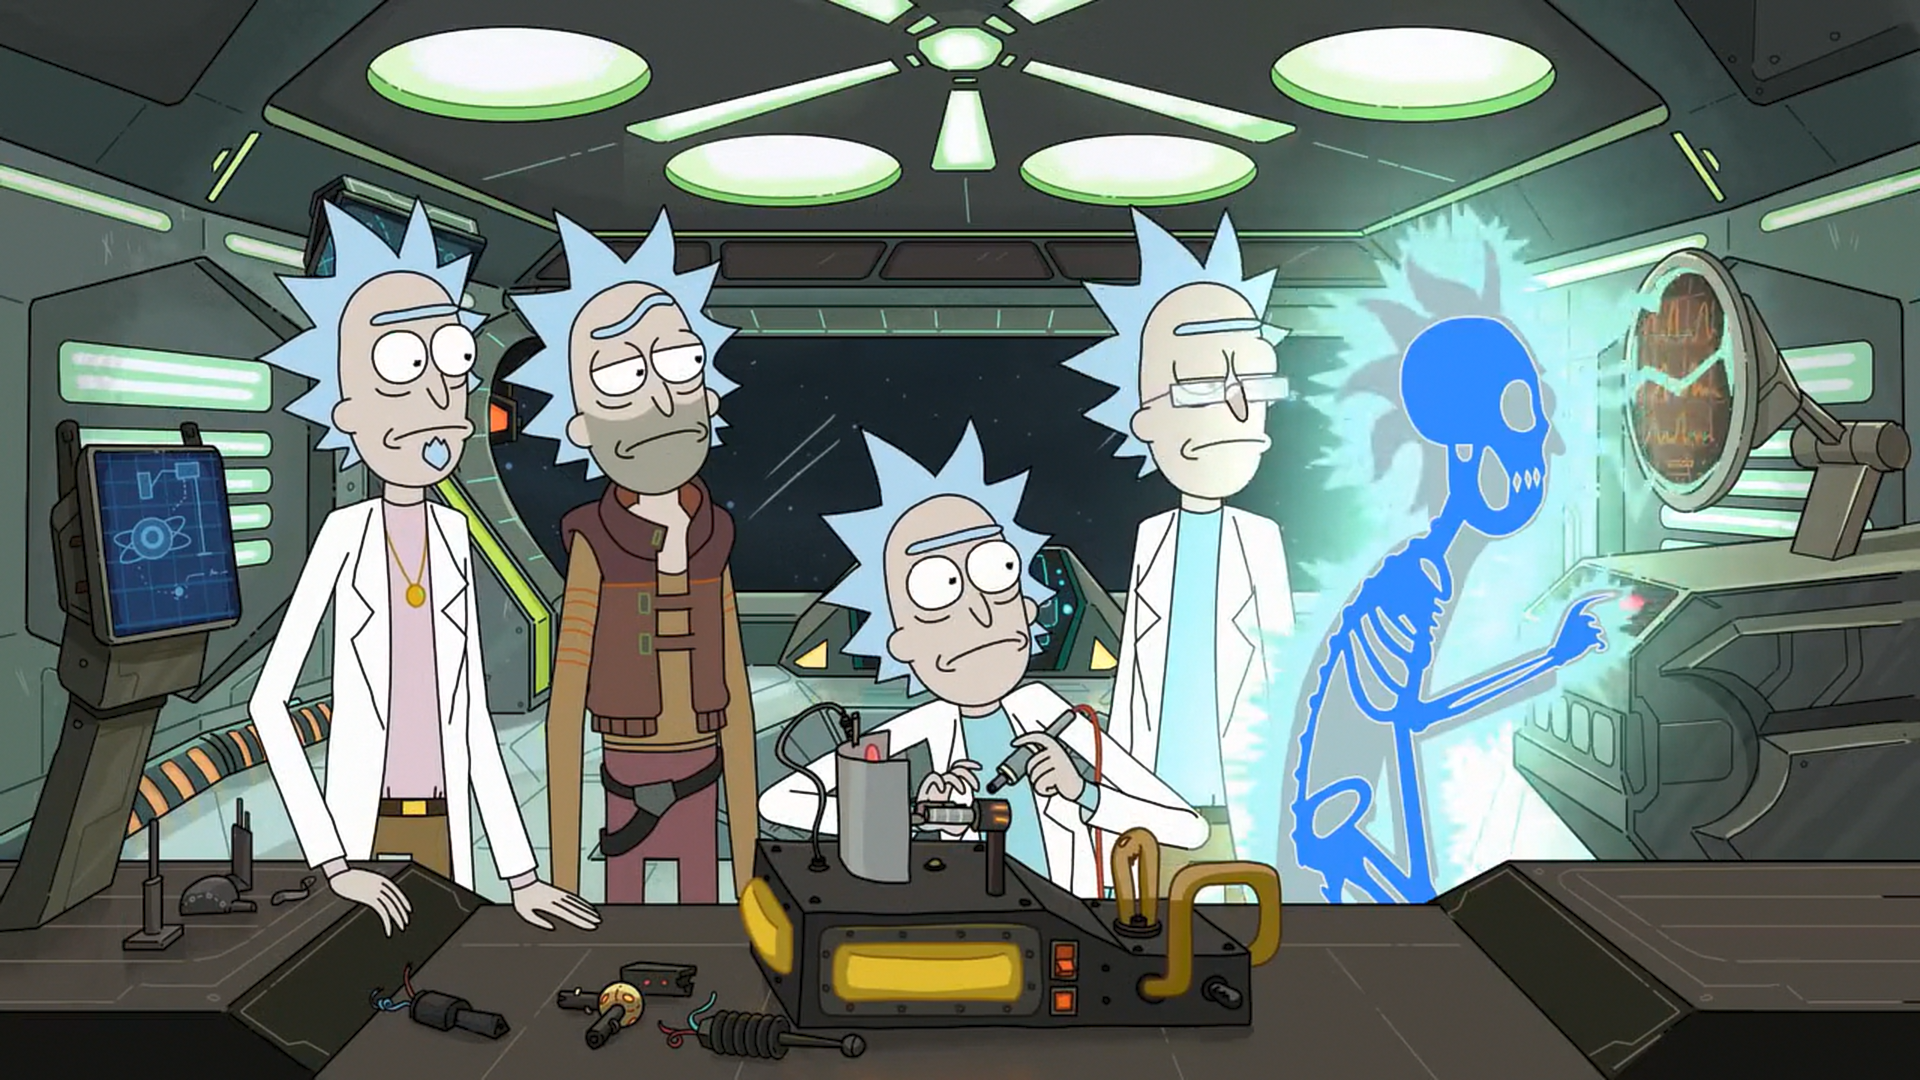 General 1920x1080 Rick and Morty animated series science fiction TV series